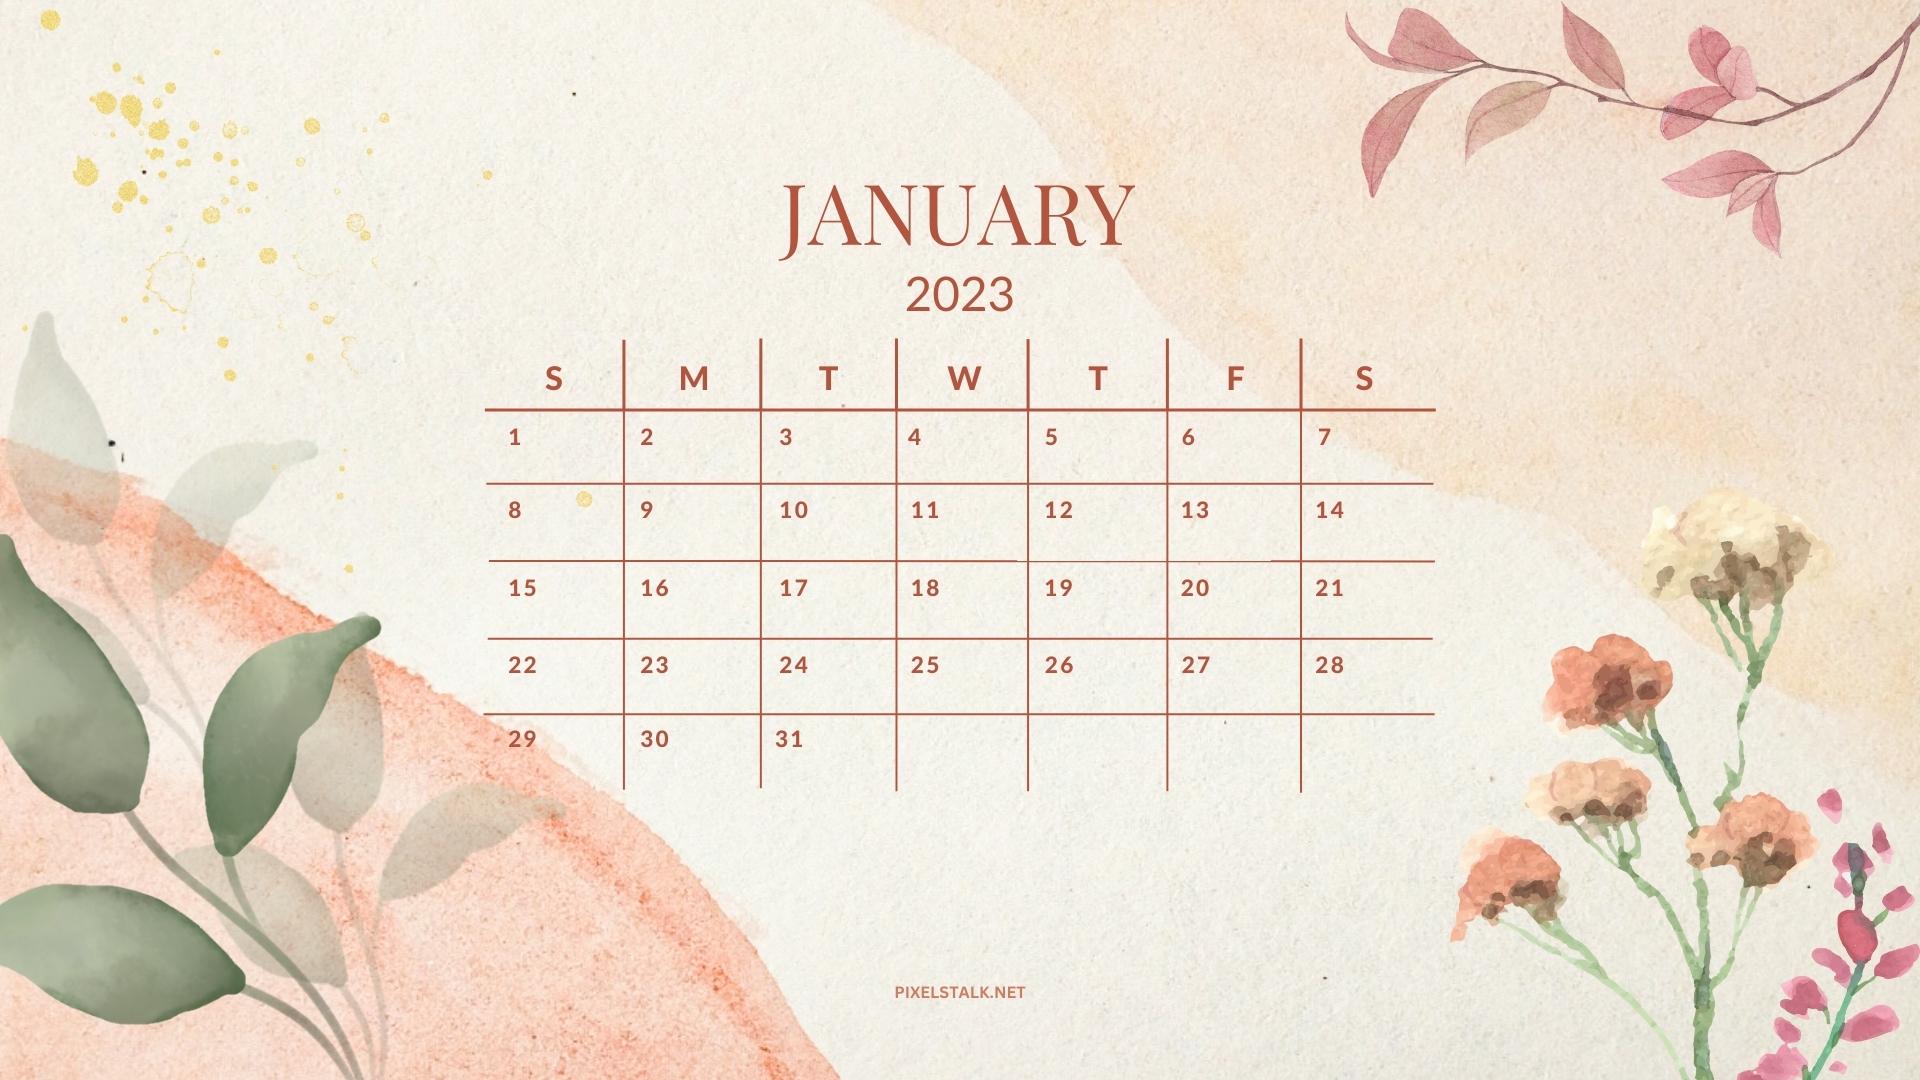 January 2023 free aesthetic calendar wallpaper  lock screen backgrounds  for your phone  The Aesthetic Shop